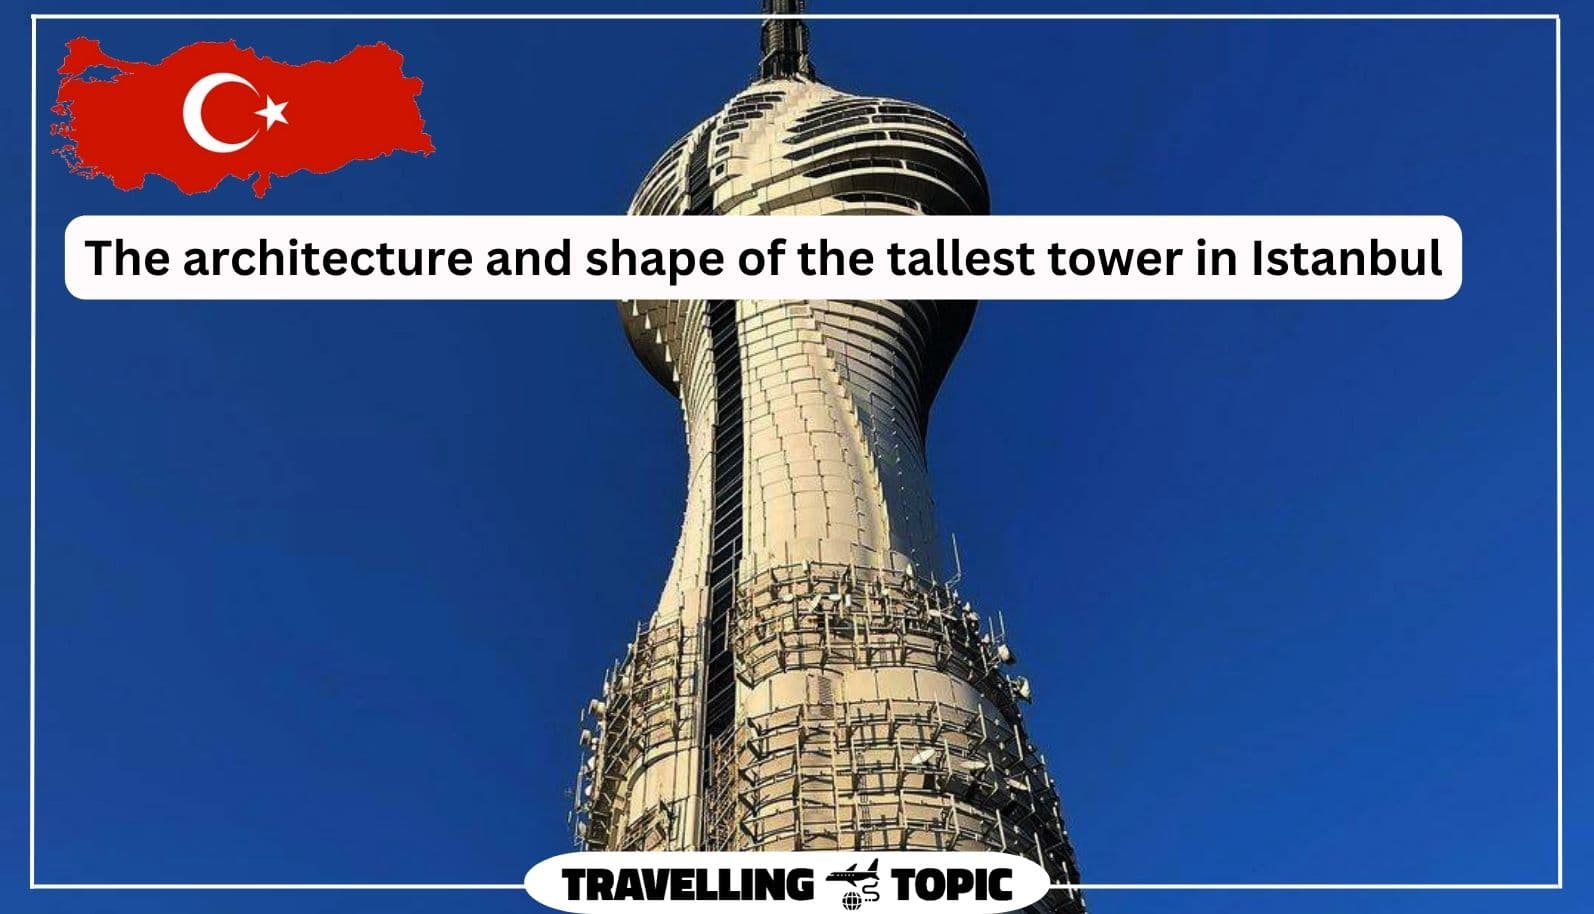 The architecture and shape of the tallest tower in Istanbul